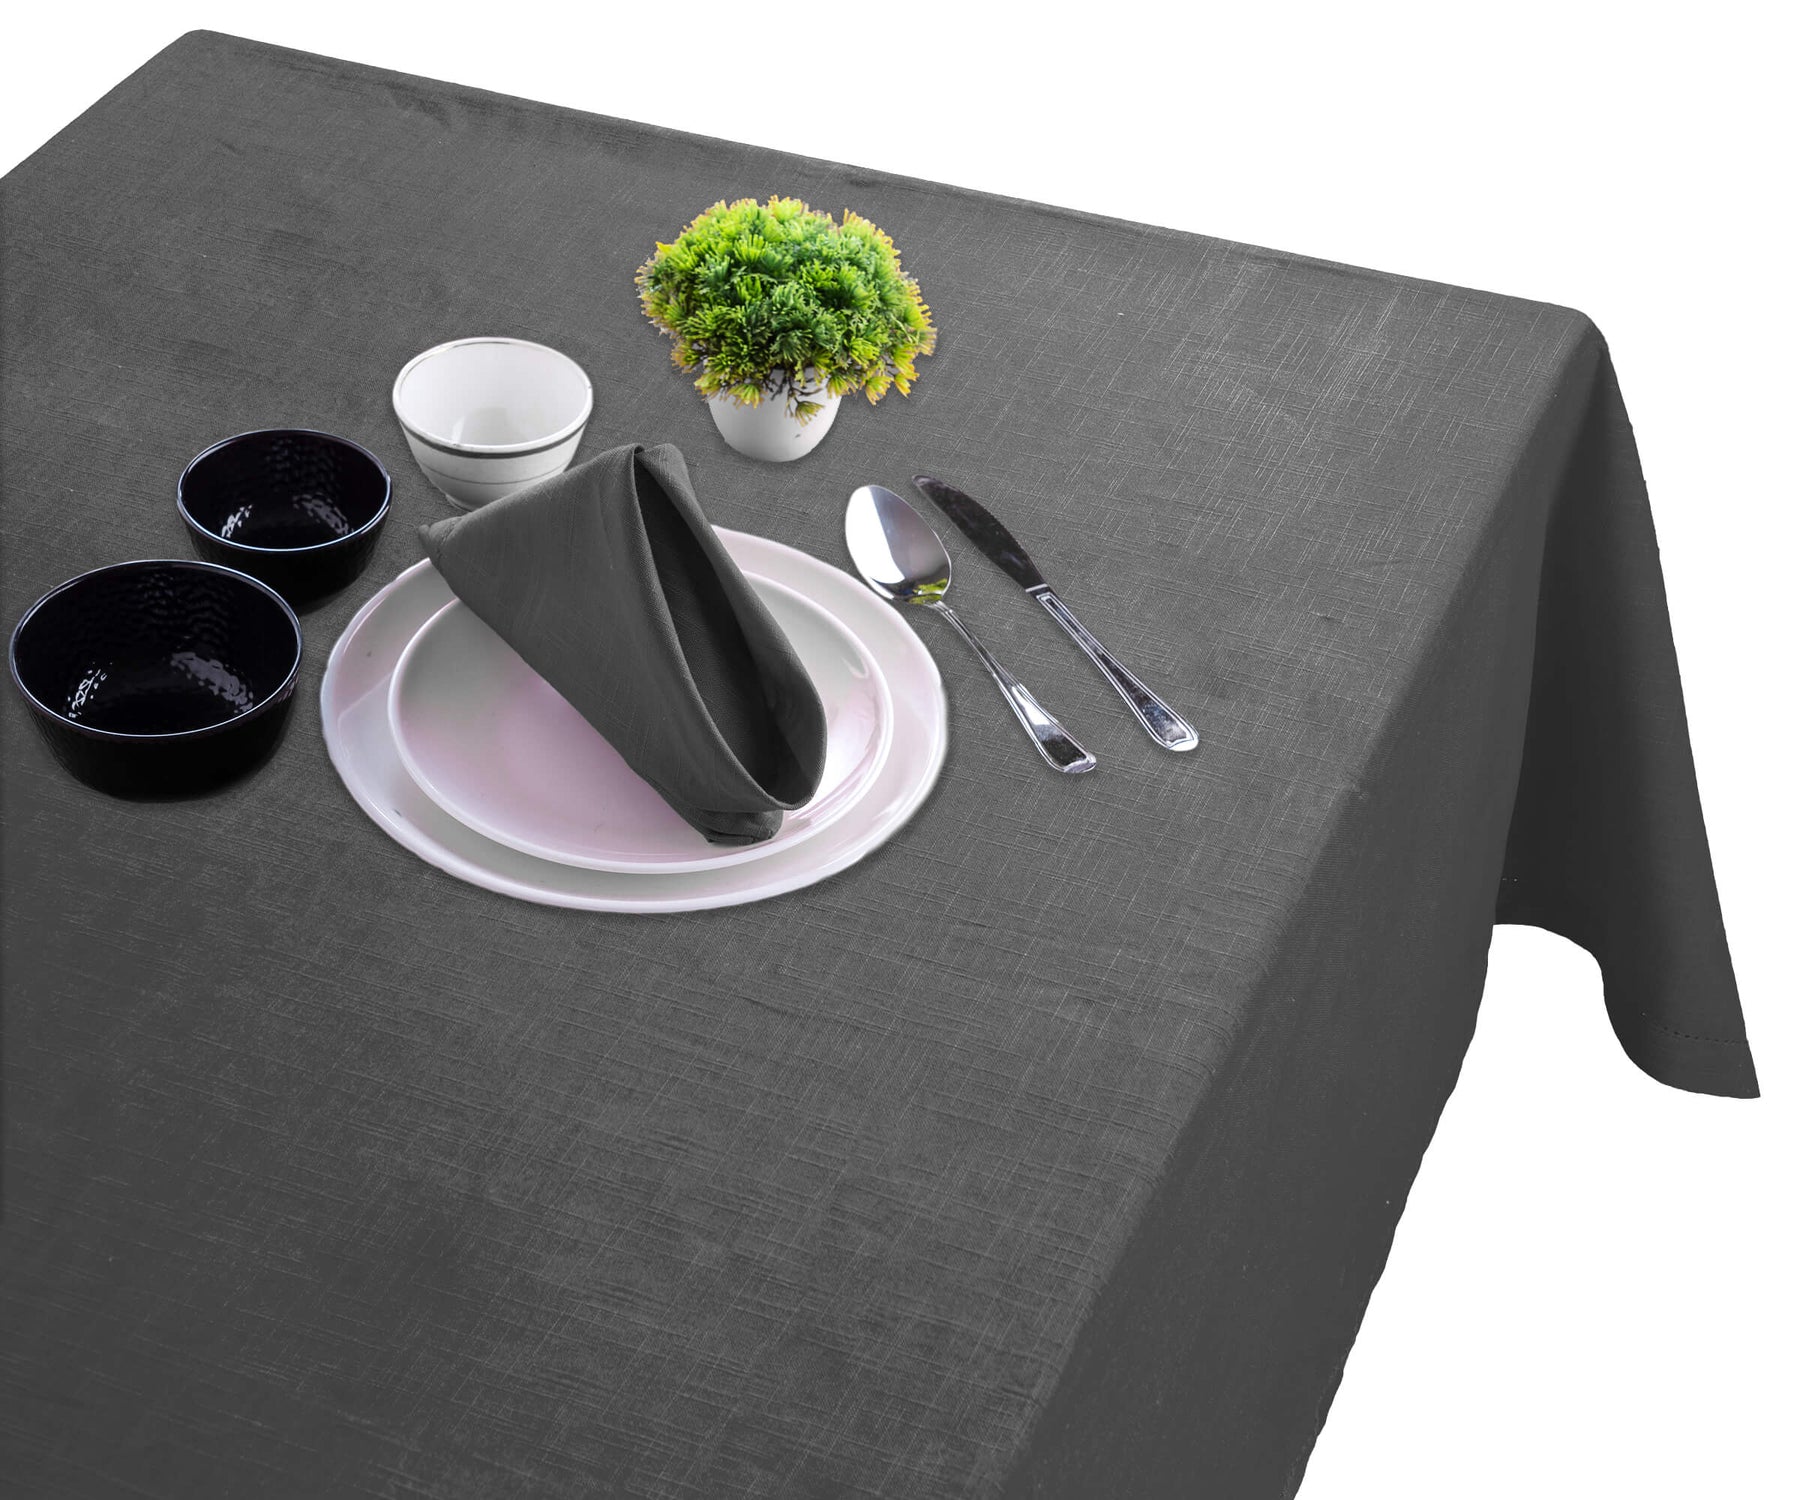 cotton tablecloths - rectangle tablecloth is placed with plates and spoon.